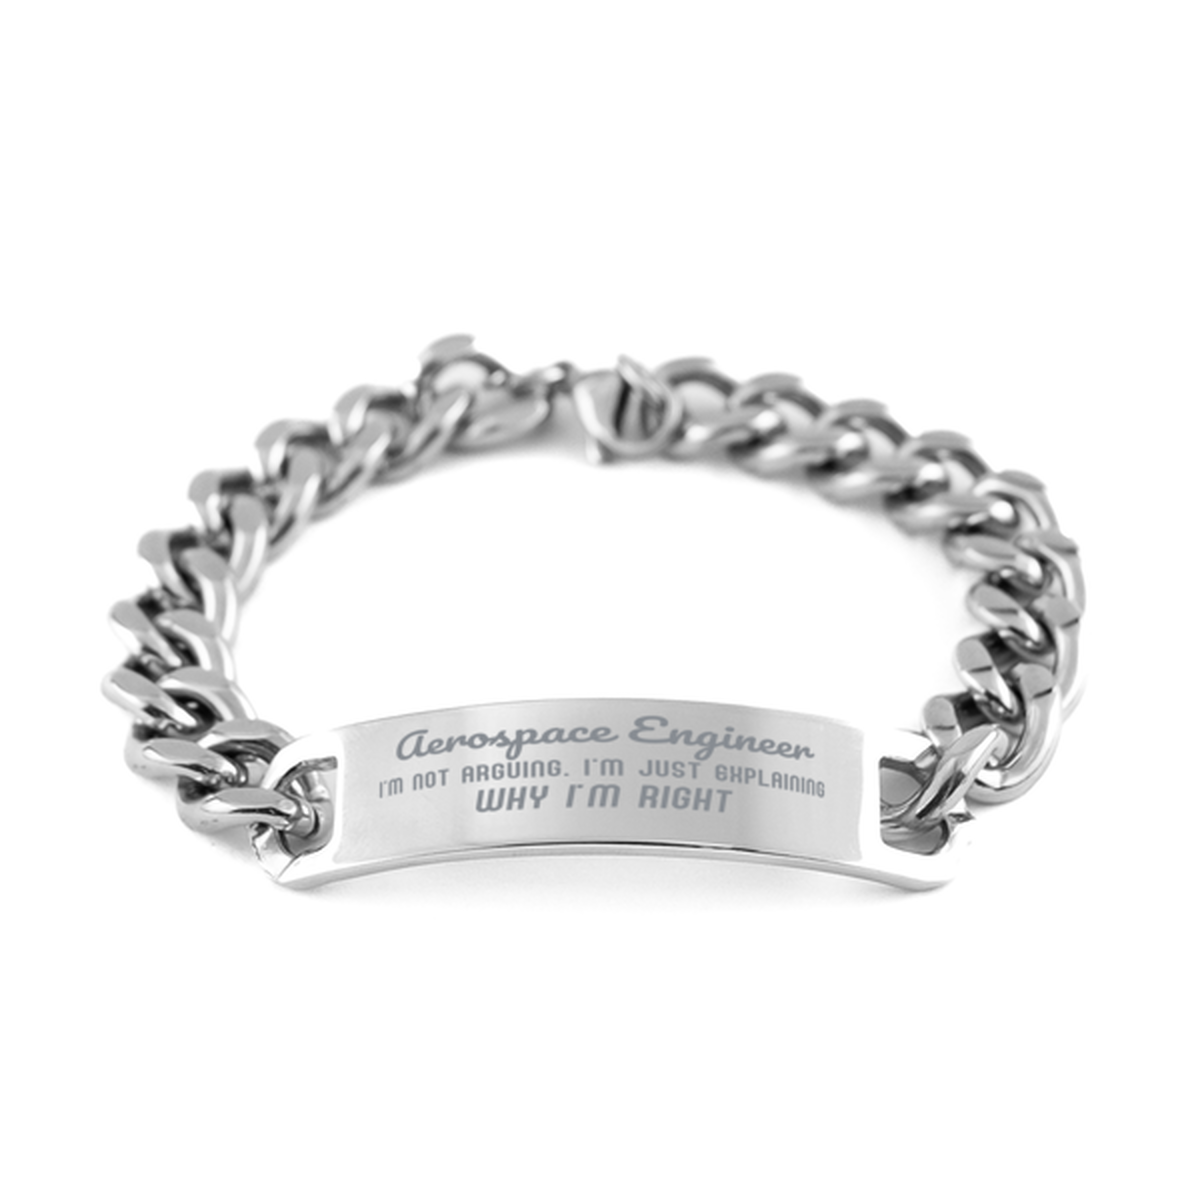 Aerospace Engineer I'm not Arguing. I'm Just Explaining Why I'm RIGHT Cuban Chain Stainless Steel Bracelet, Graduation Birthday Christmas Aerospace Engineer Gifts For Aerospace Engineer Funny Saying Quote Present for Men Women Coworker